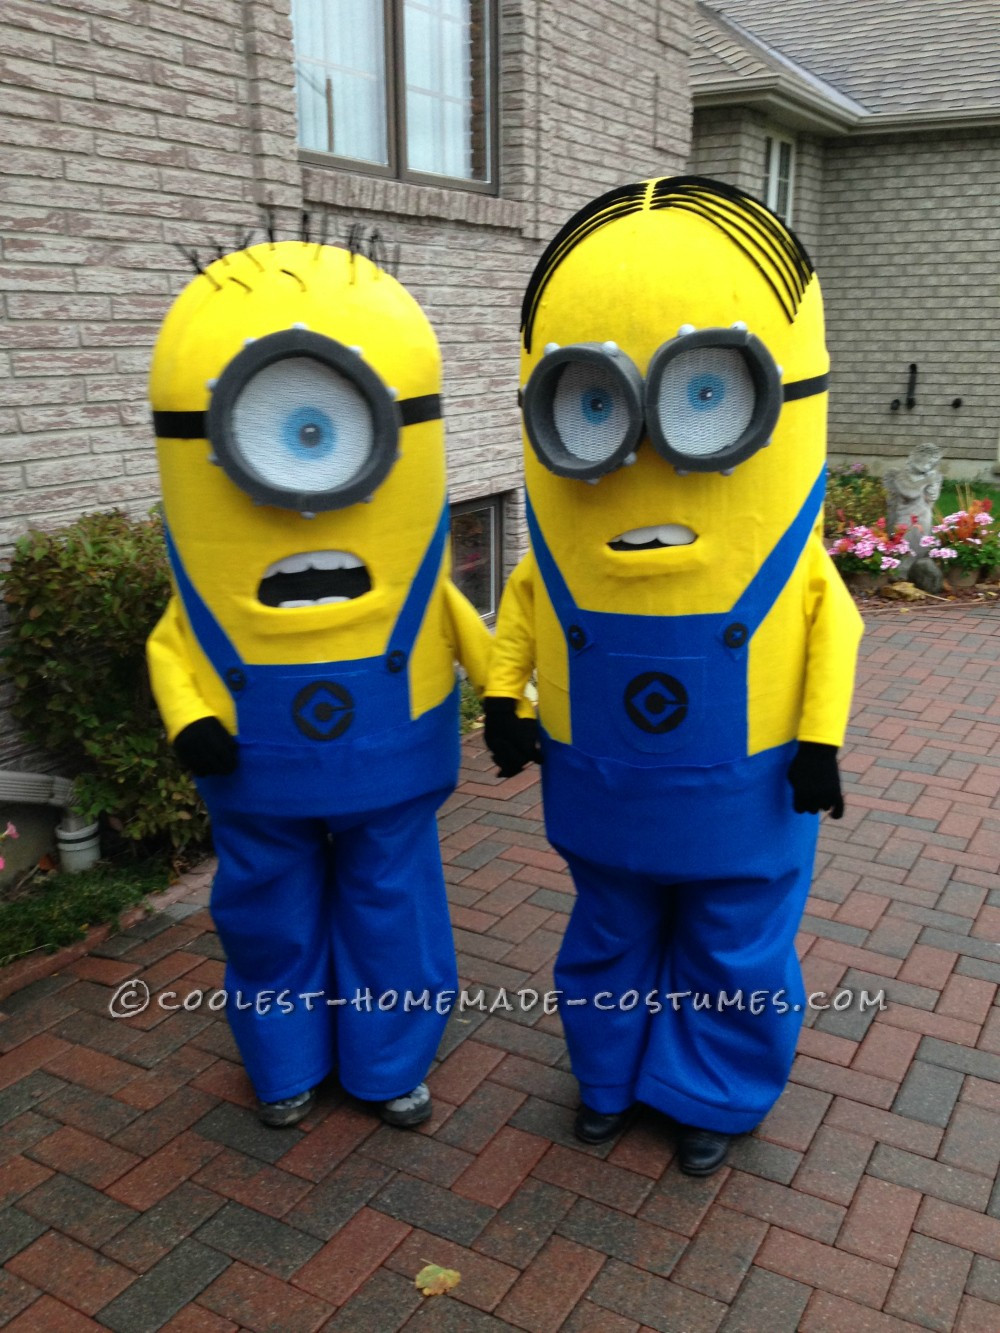 DIY Minion Costume For Toddler
 Homemade Kids Minion Costumes